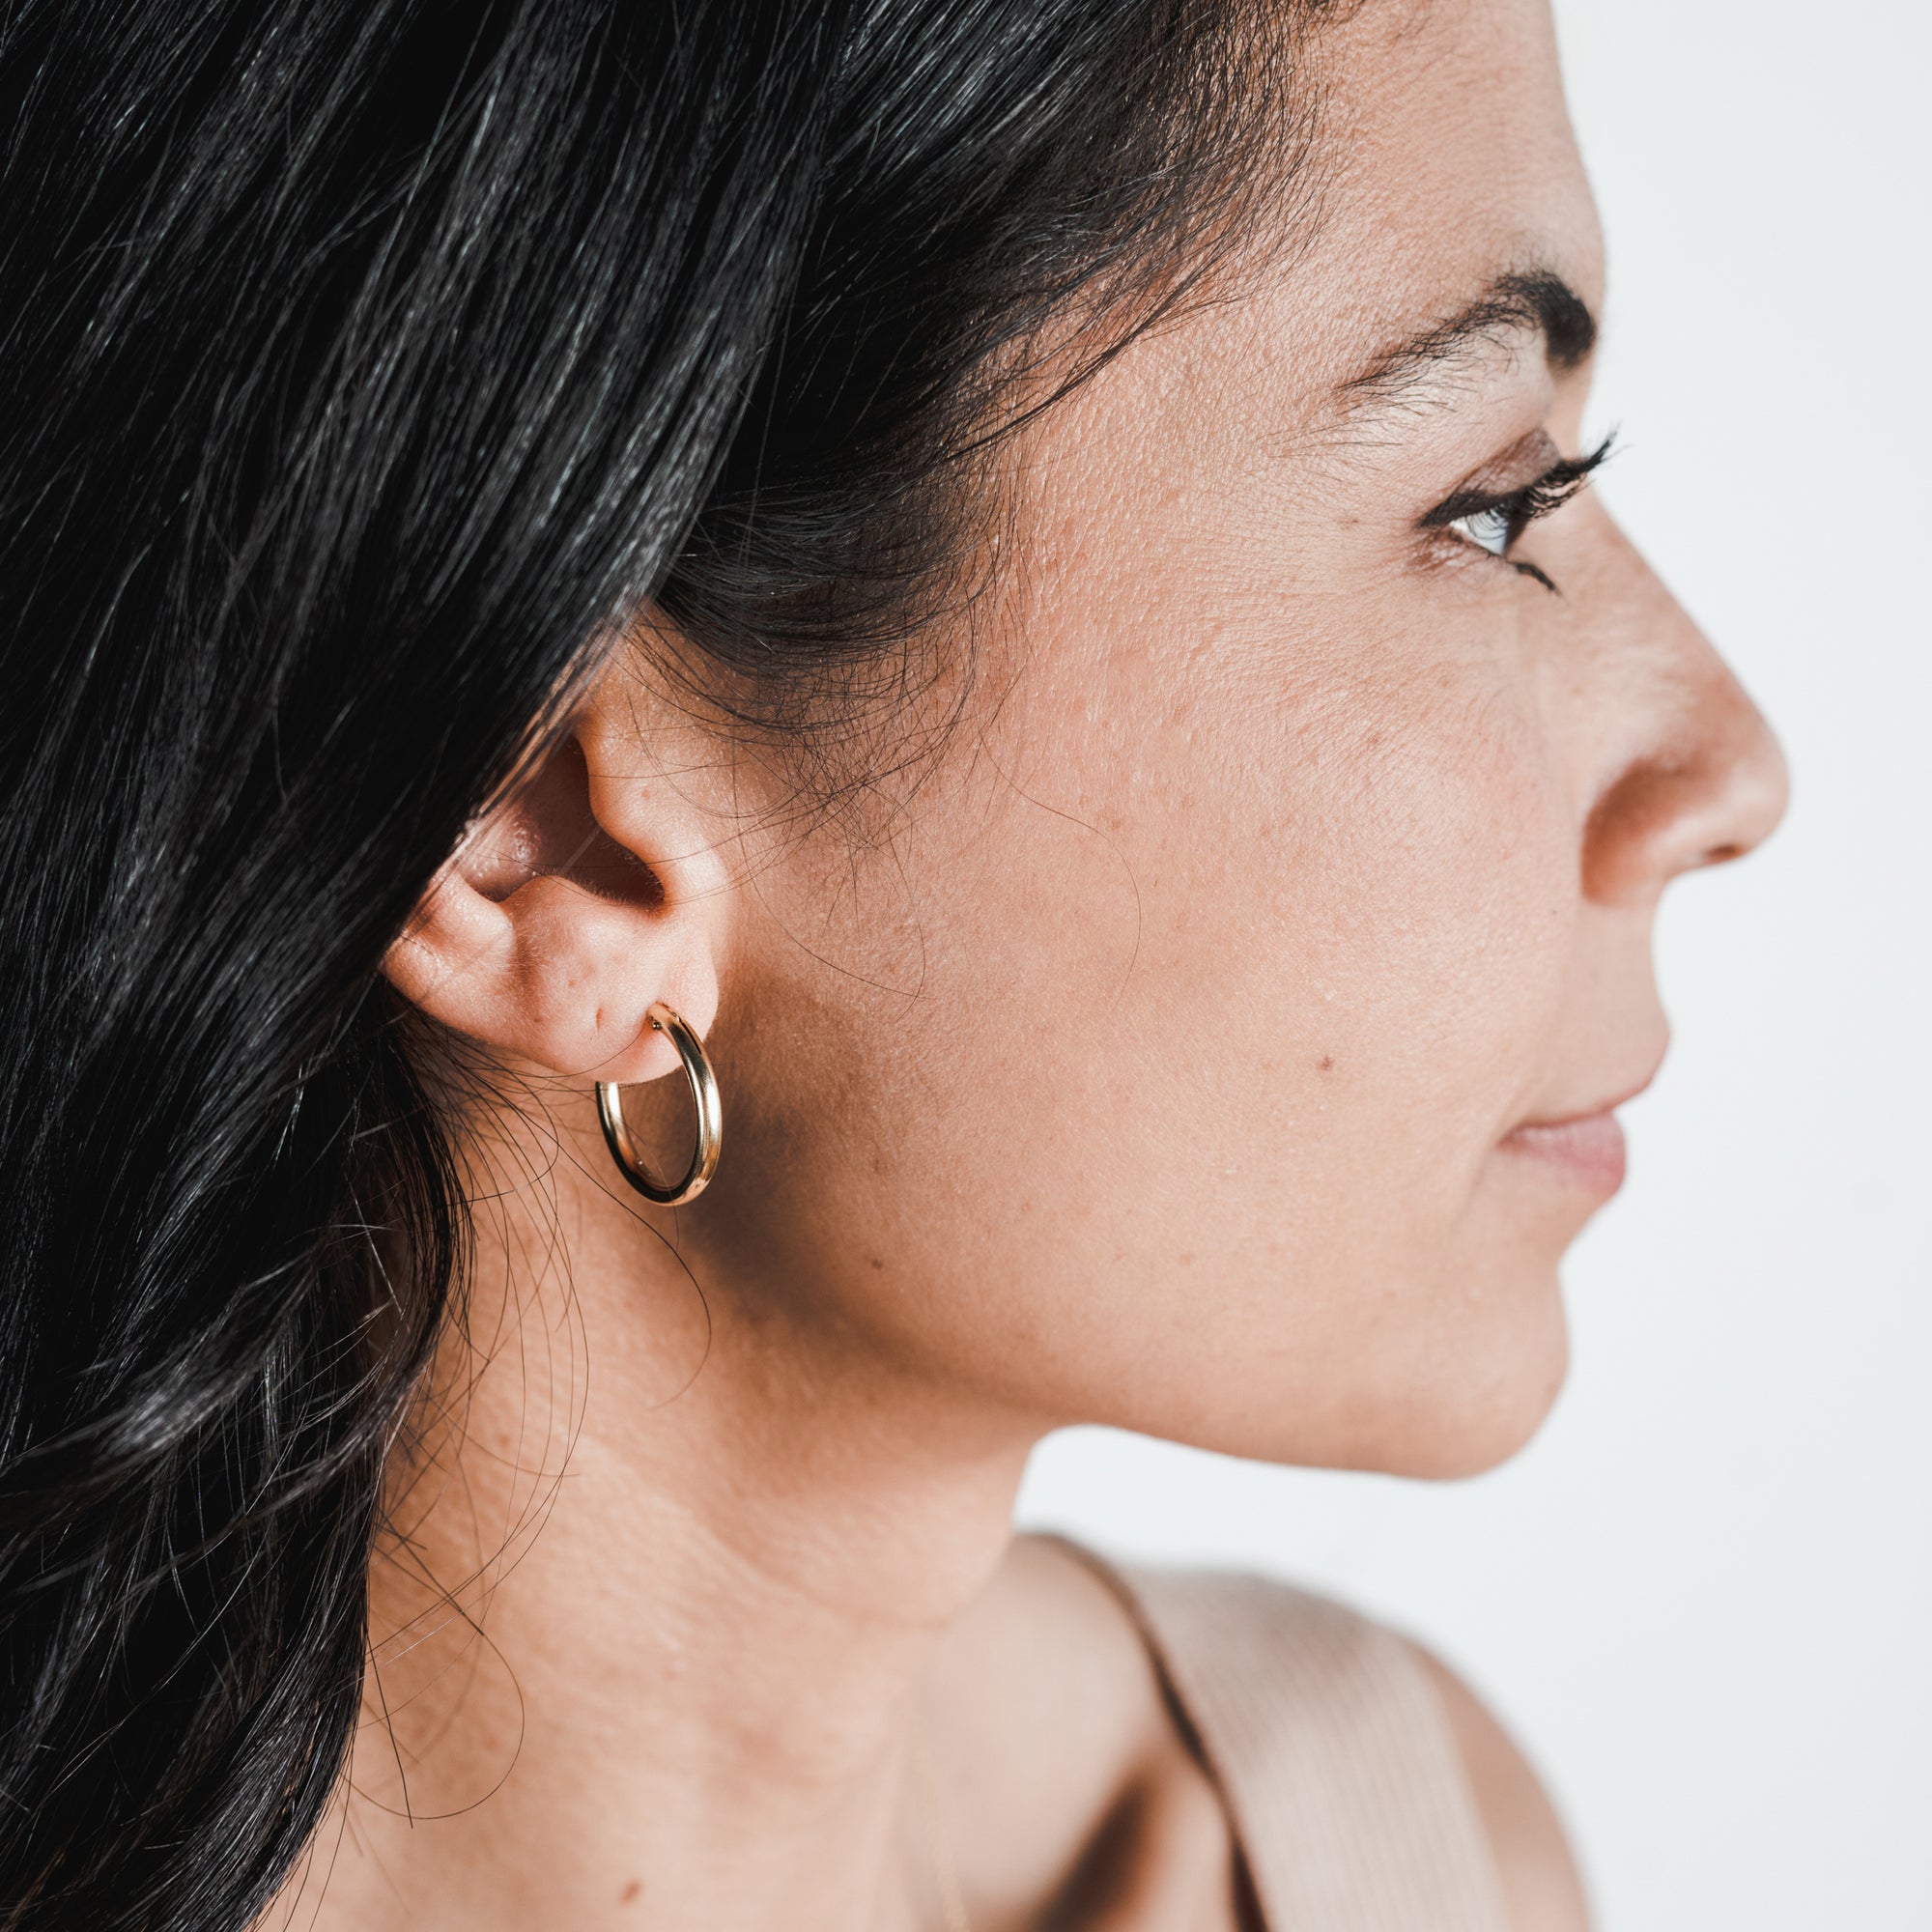 Profile of a woman with a Becoming Jewelry Everyday Hoop Earrings, large.